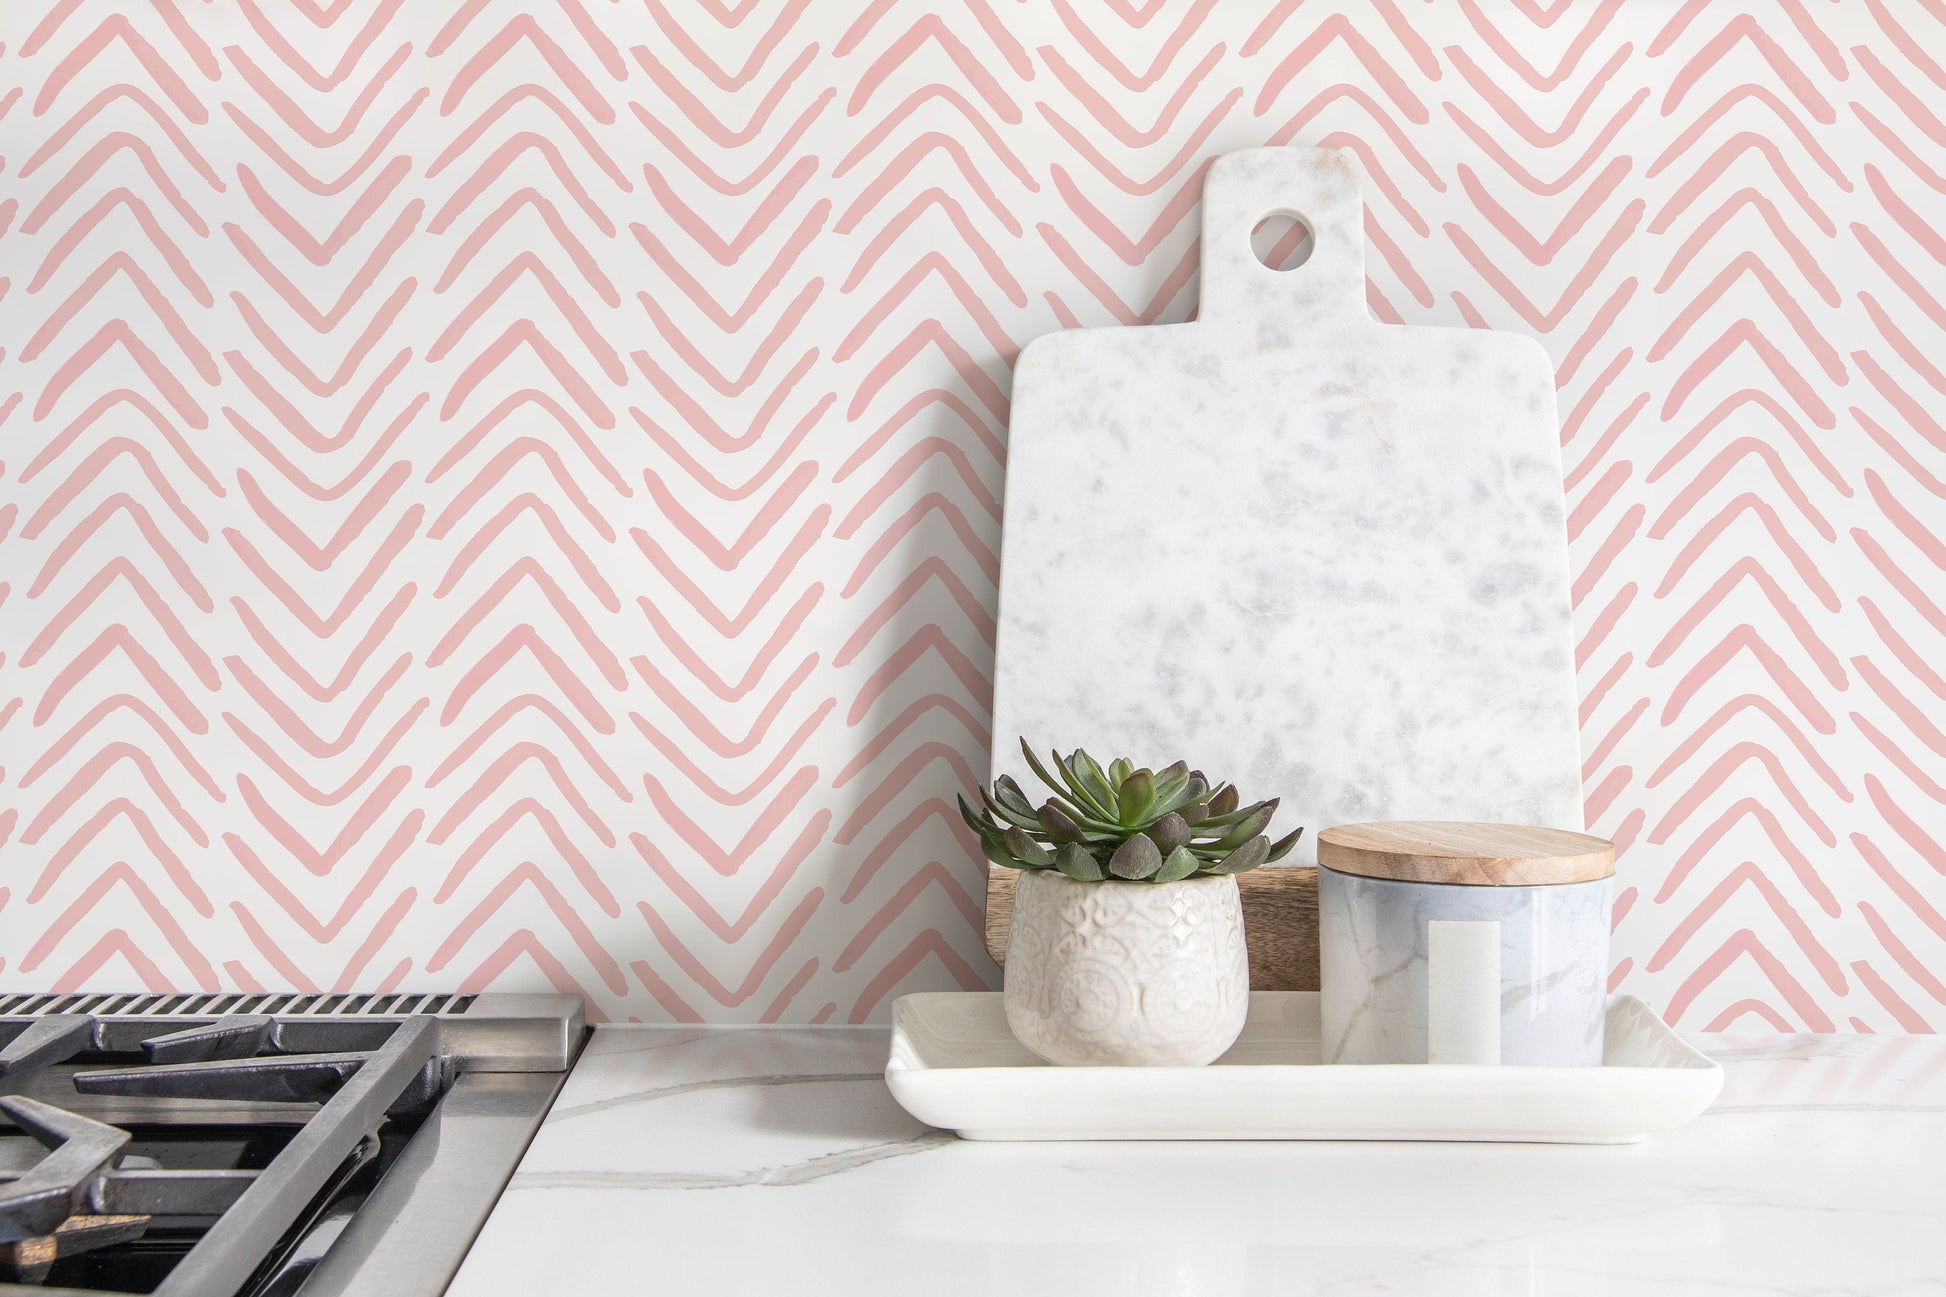 Boho Herringbone in Soft Pink Wallpaper Removable and Repositionable Peel and Stick or Traditional Pre-pasted Wallpaper - ZADA